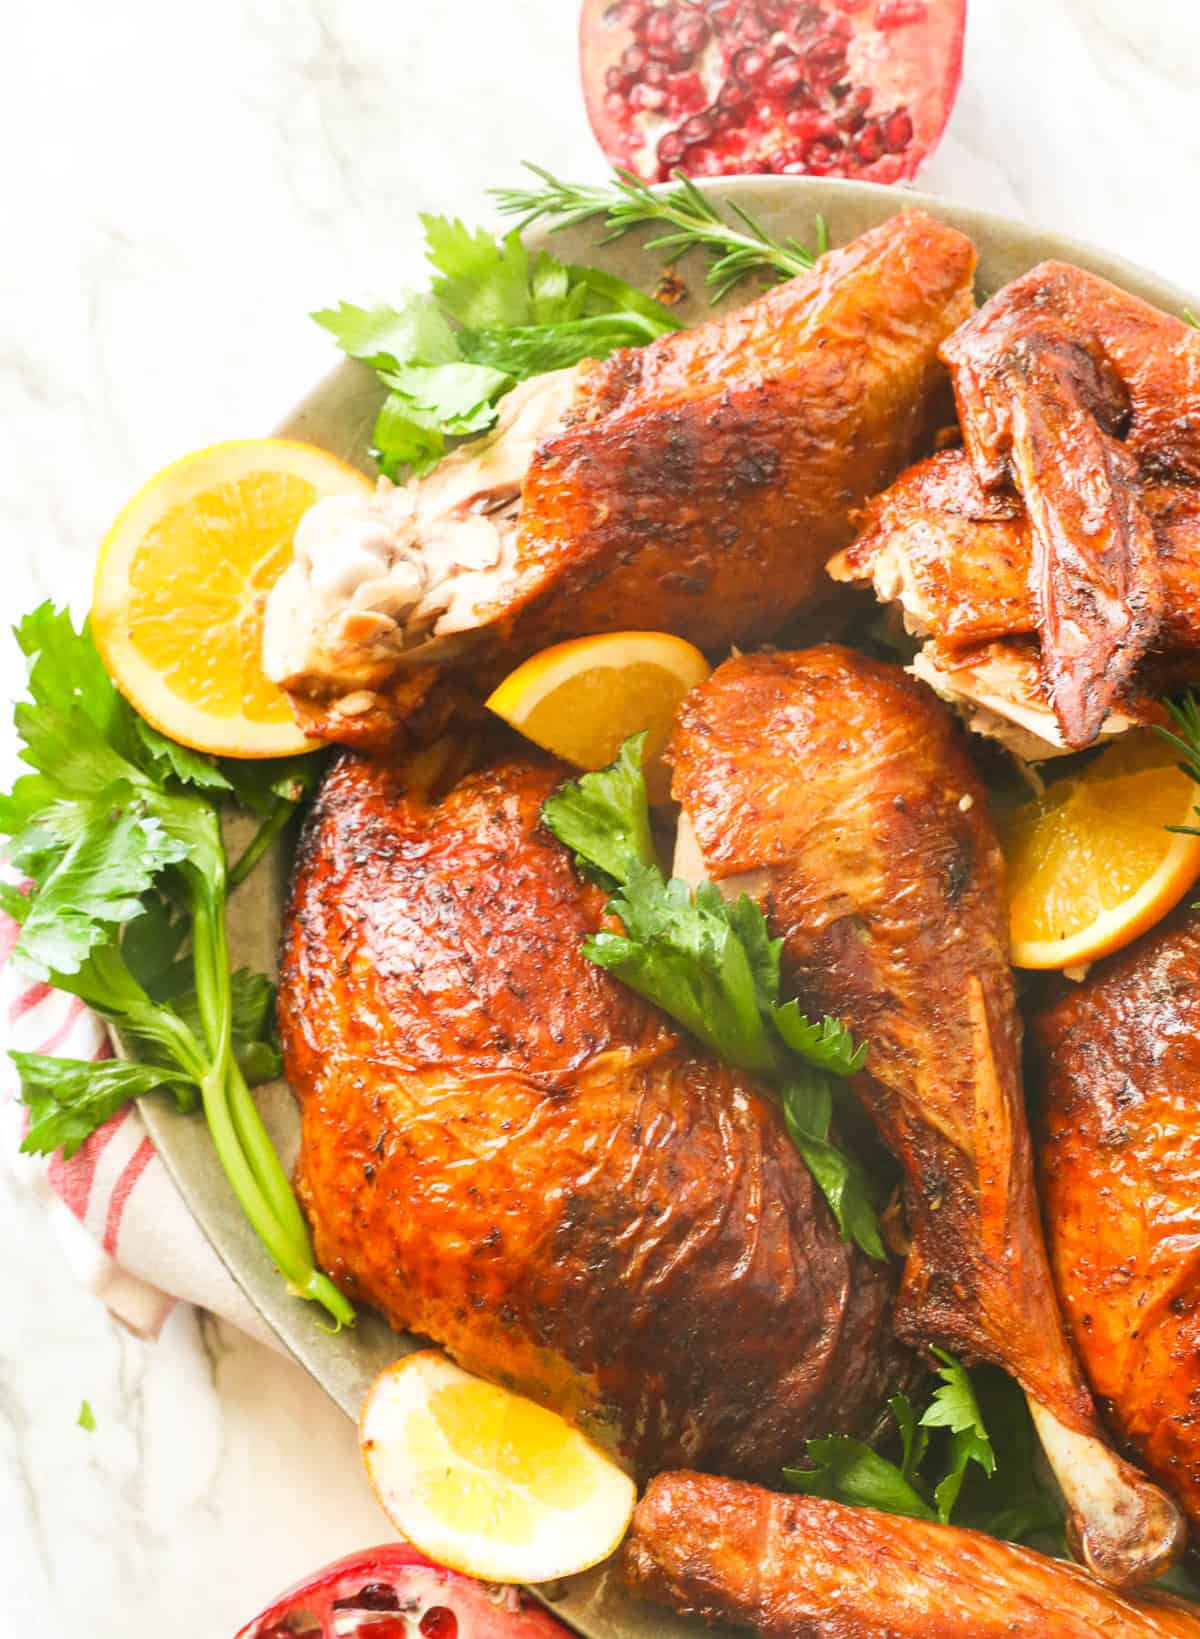 Carved deep fried turkey with lemon and garnishes